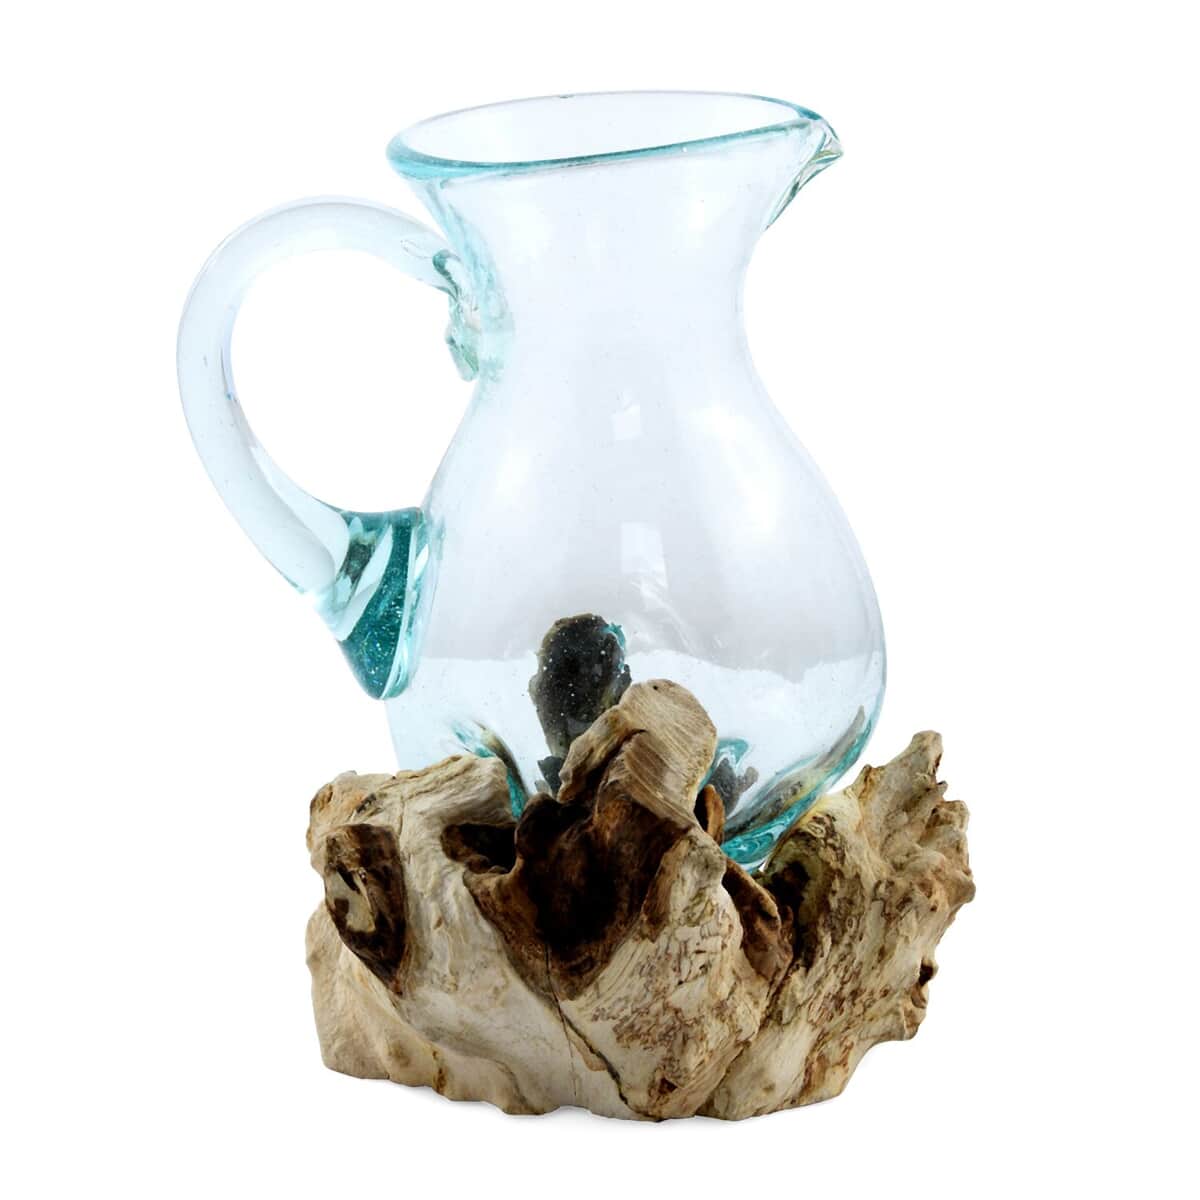 Designer Inspired Artisan Commissioned Bali Handblown Glass Pitcher with Wood Base image number 2